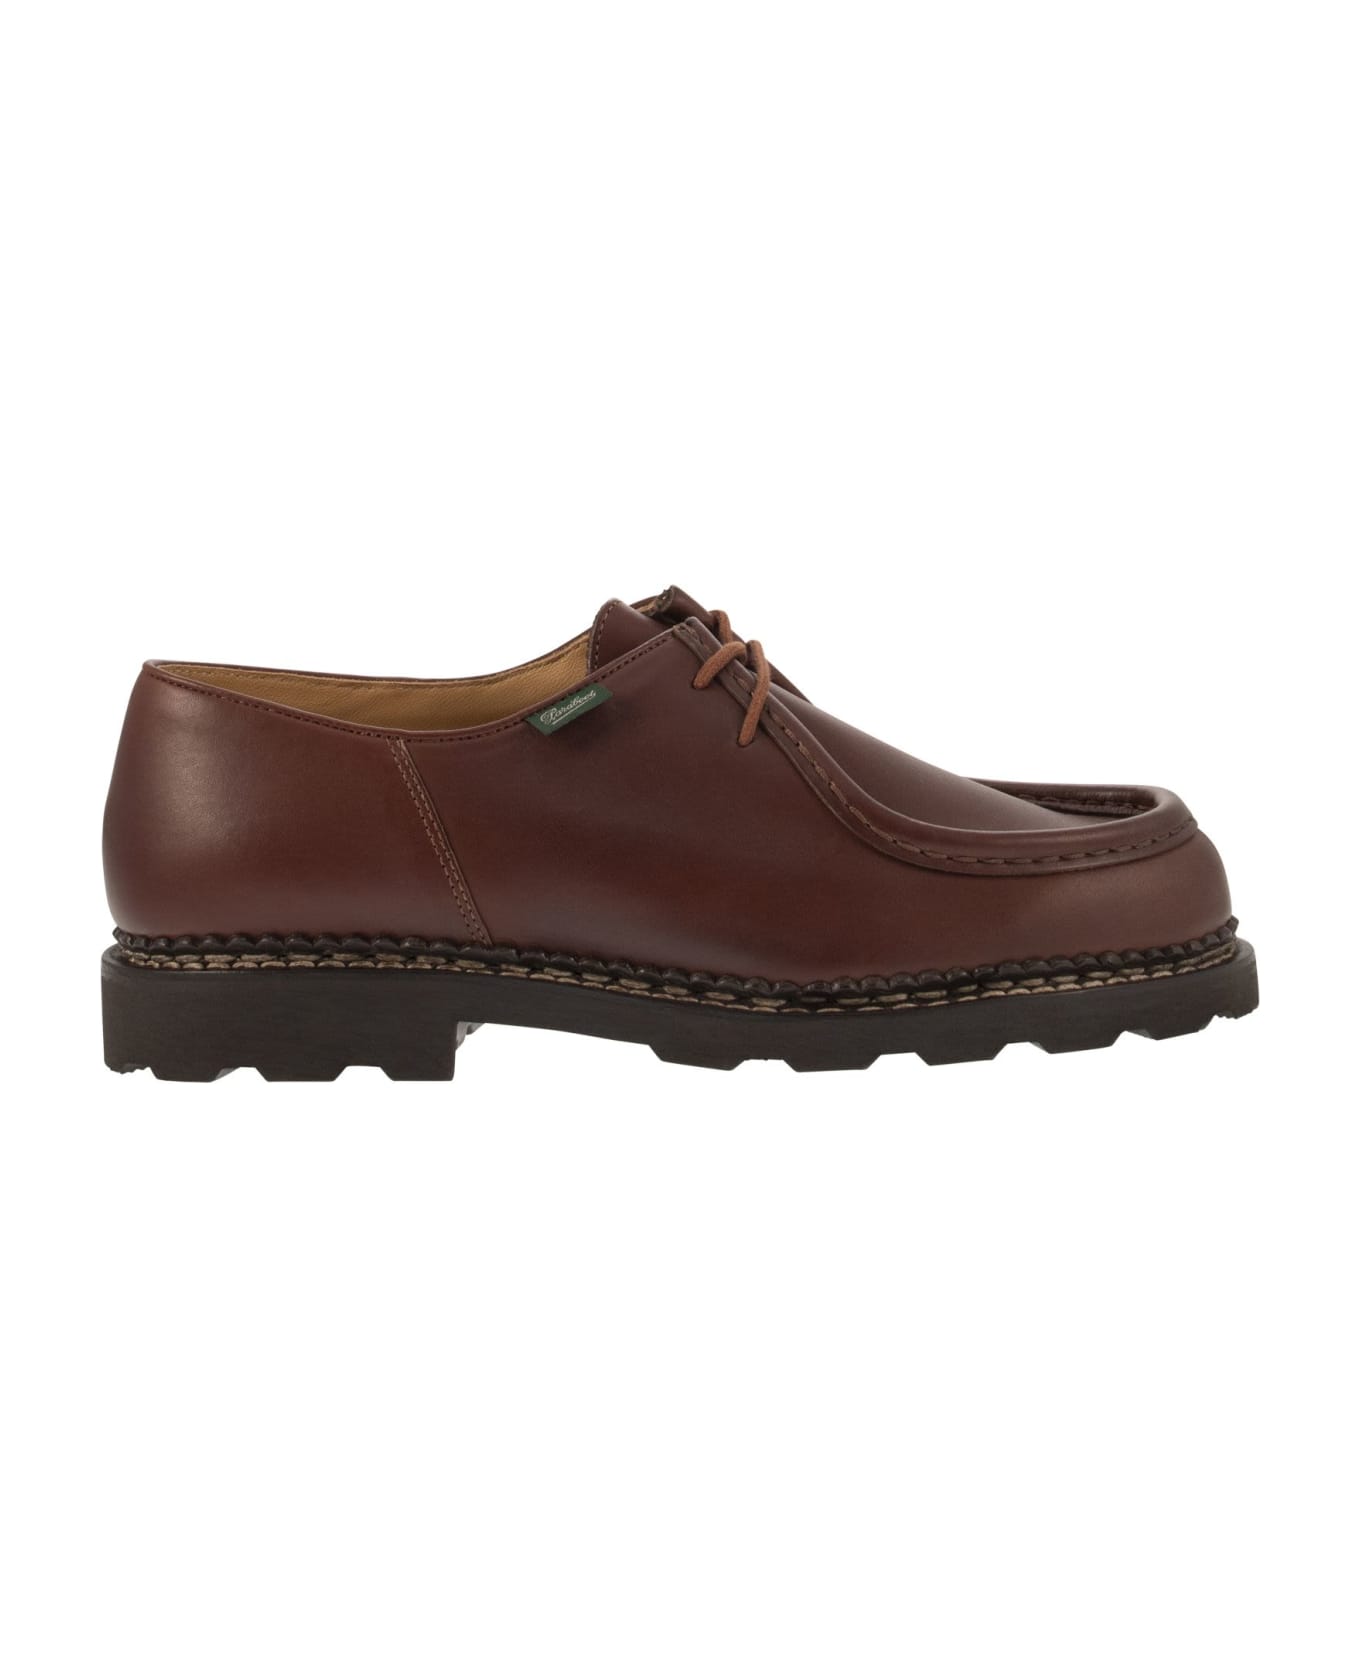 Paraboot Michael - Leather Derby - Consider this new pair of sneakers if